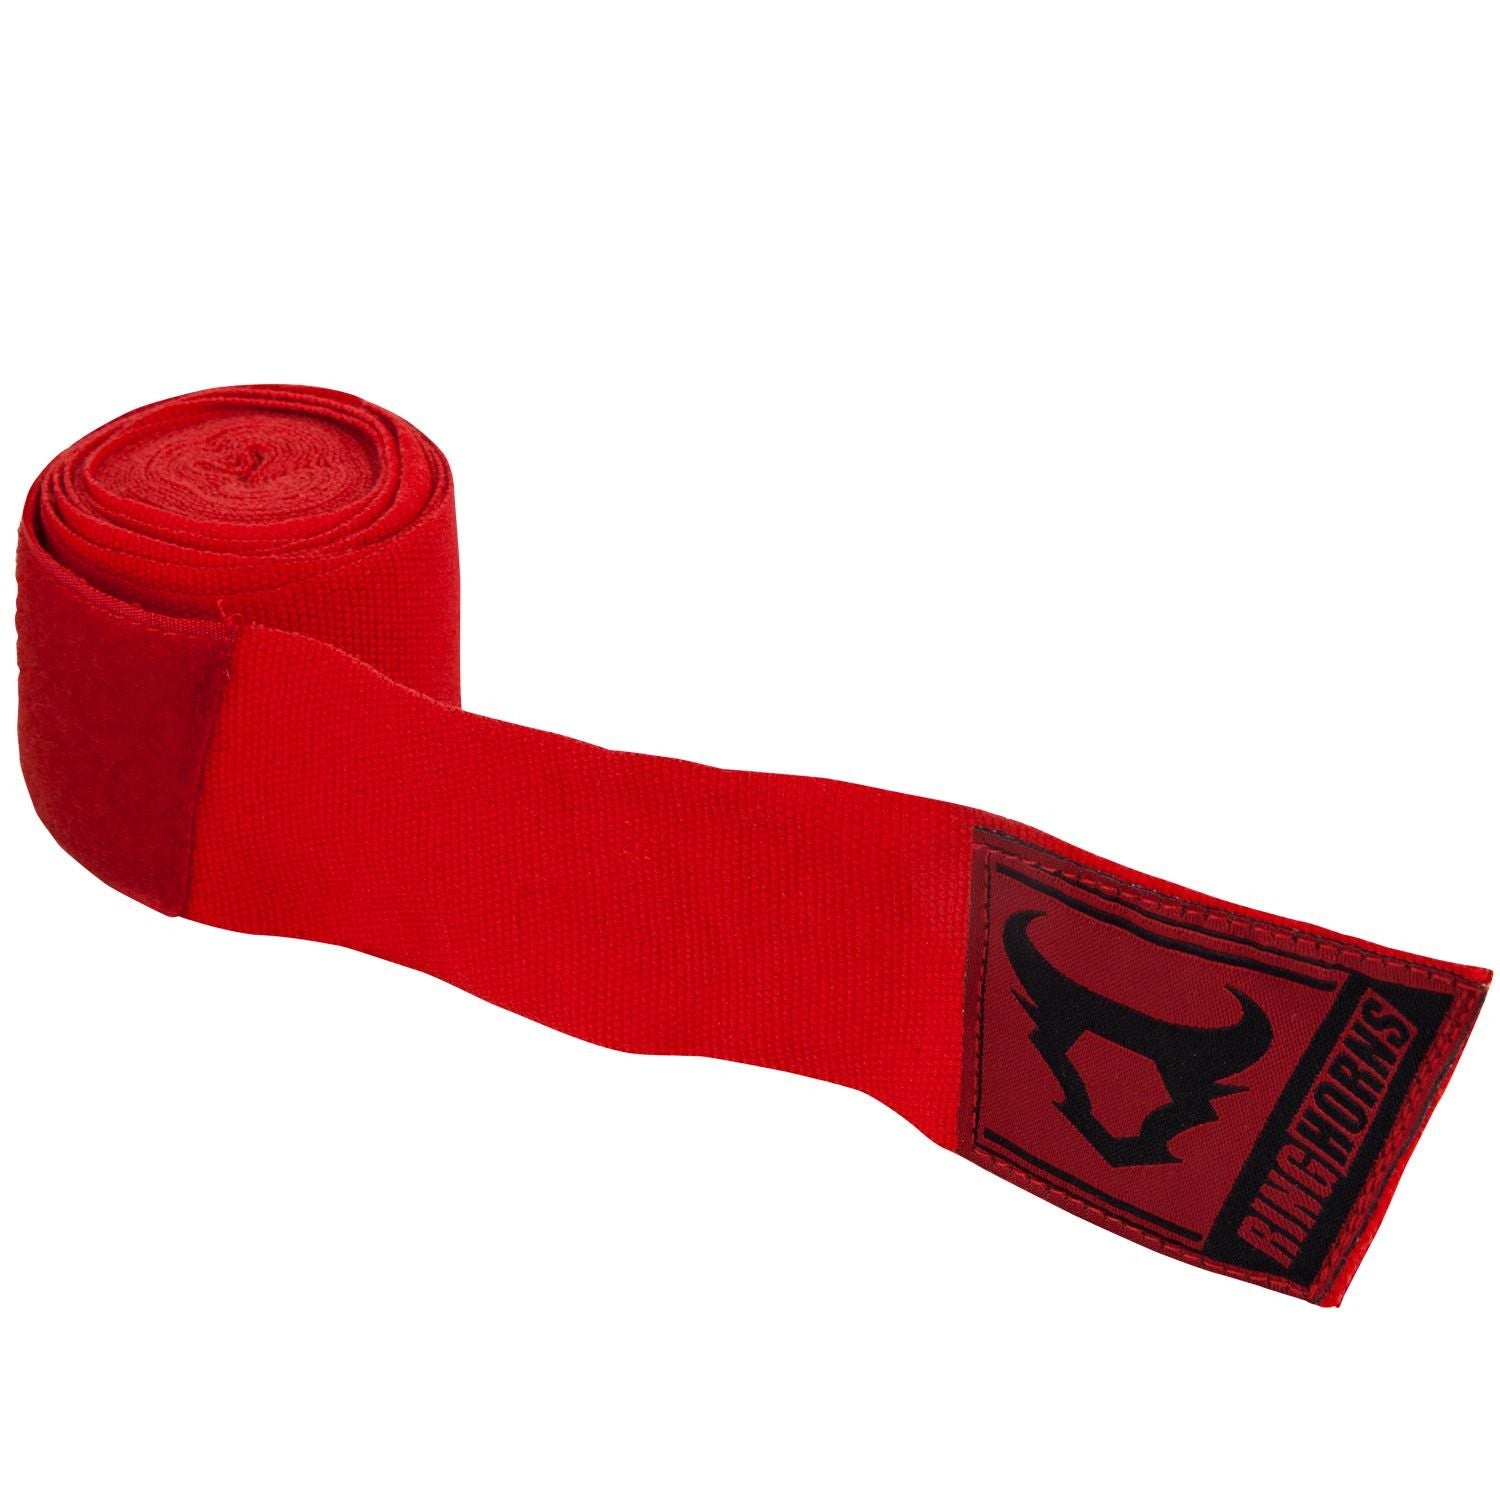 Red Ringhorns boxing wraps 